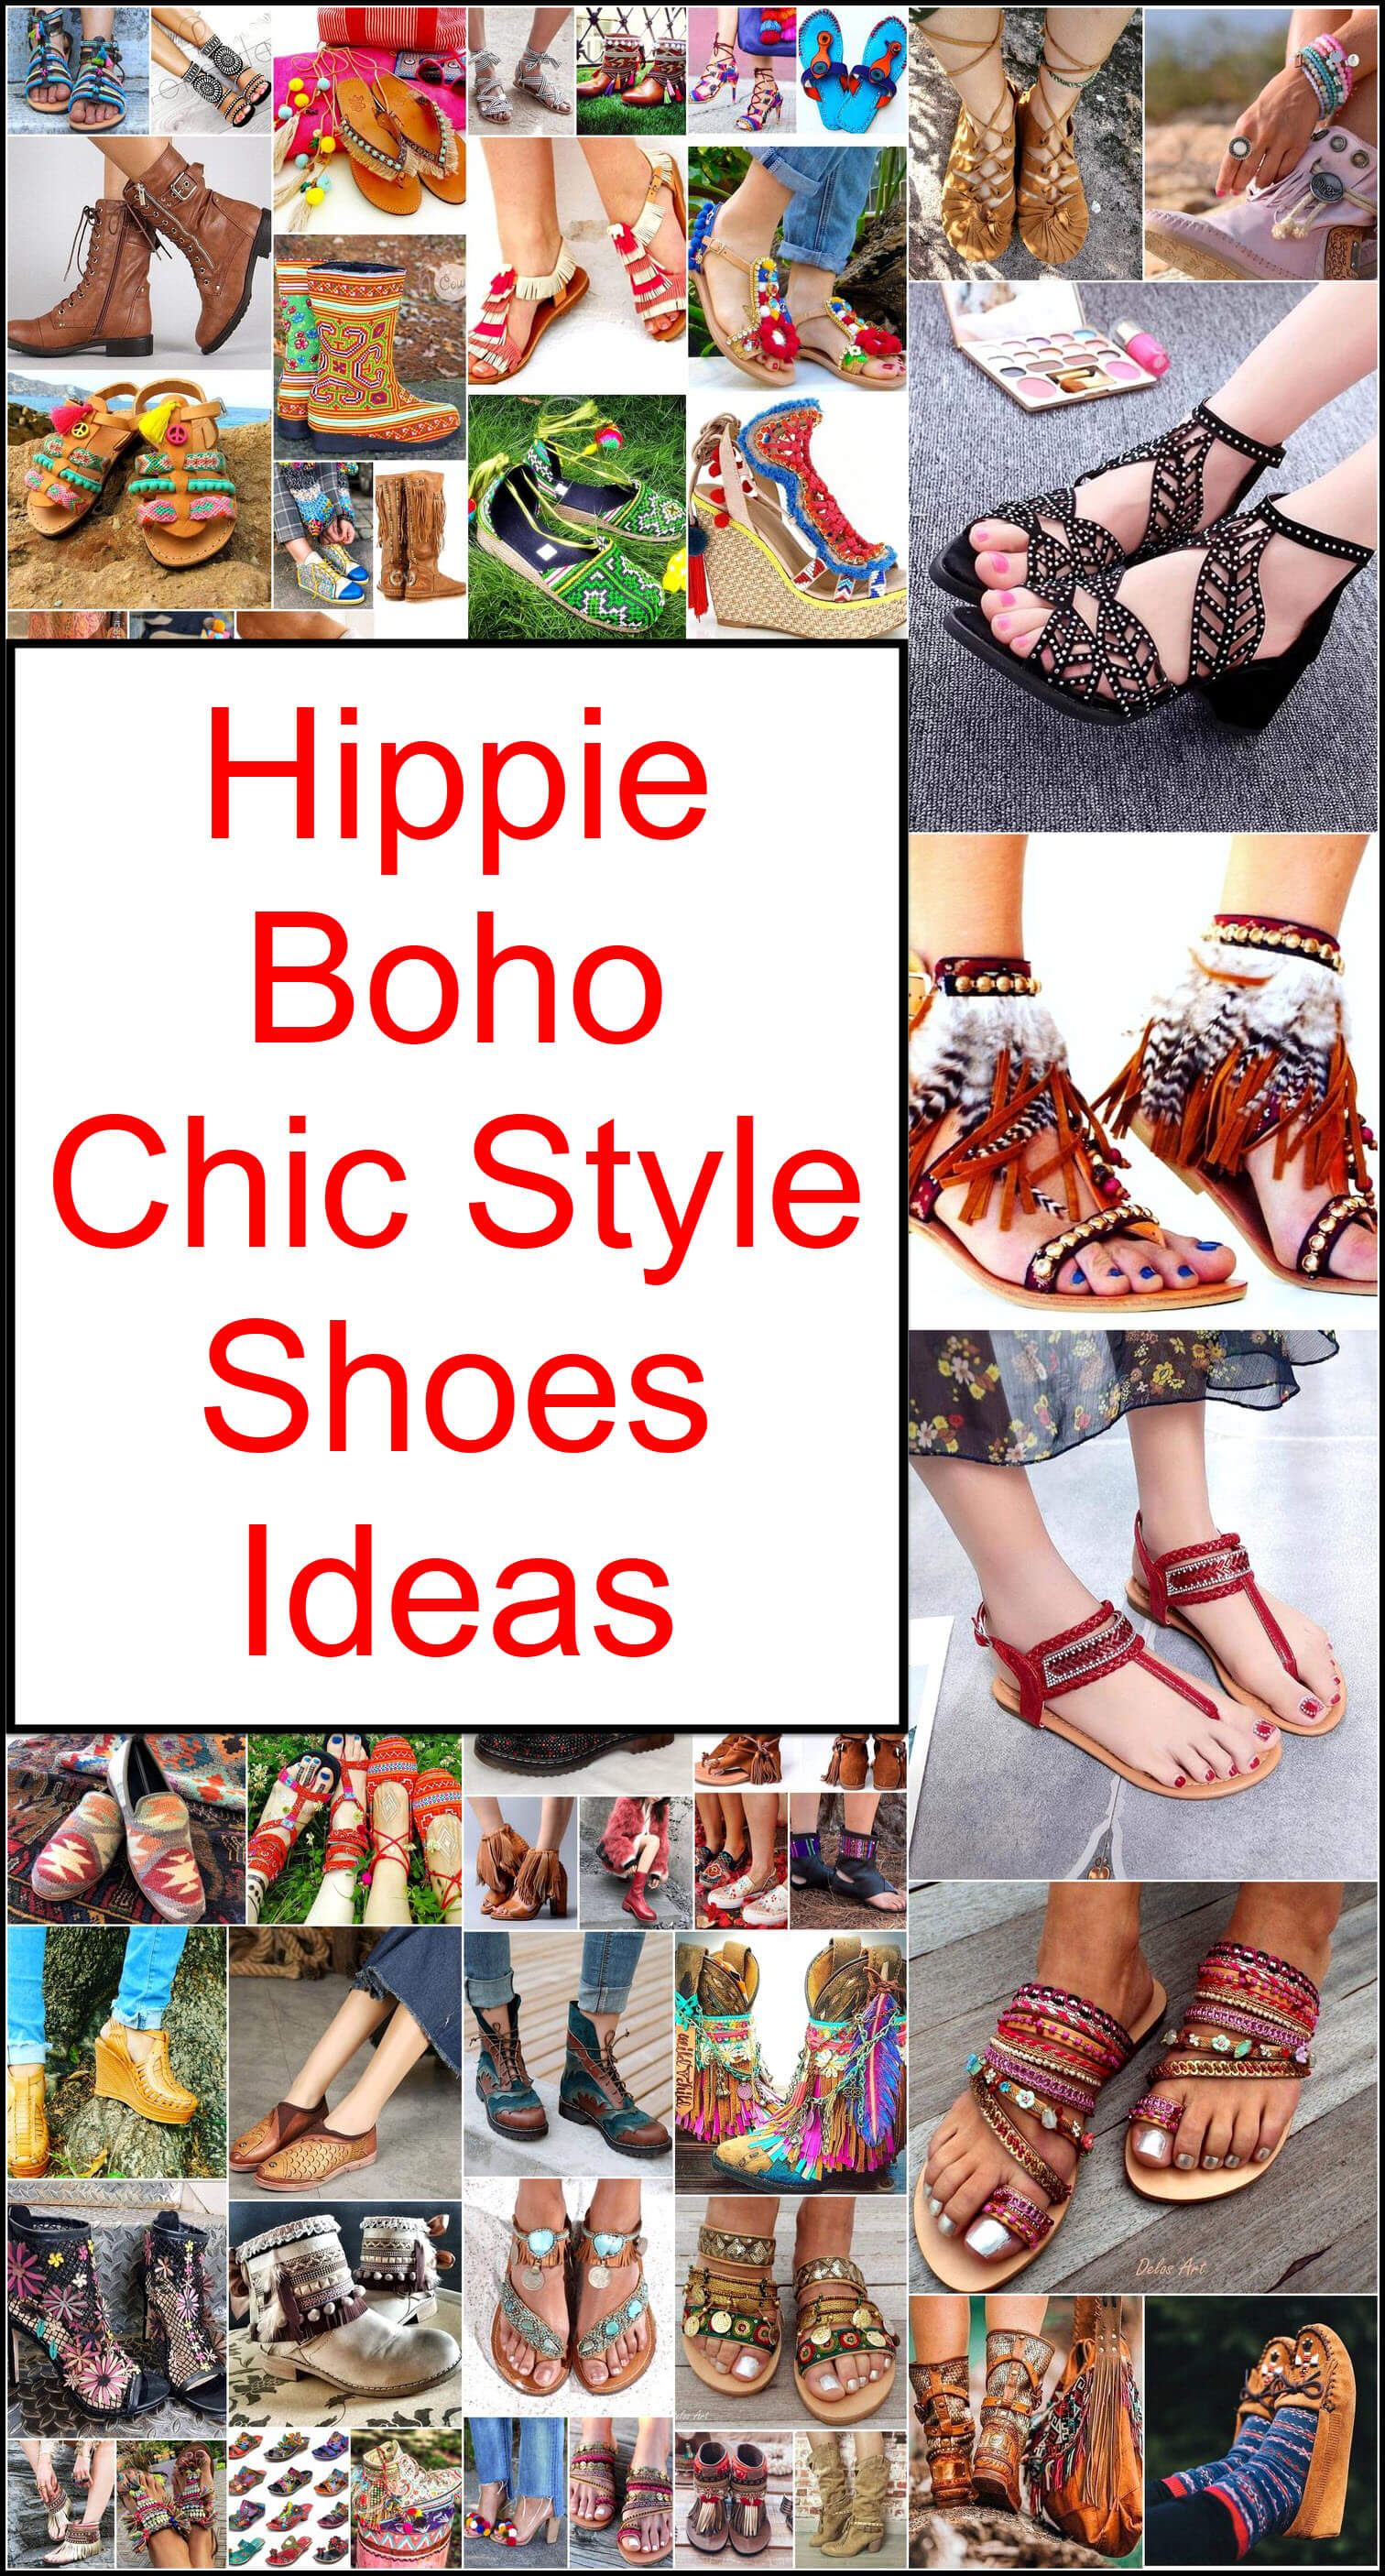 Hippie Boho Chic Style Shoes Ideas